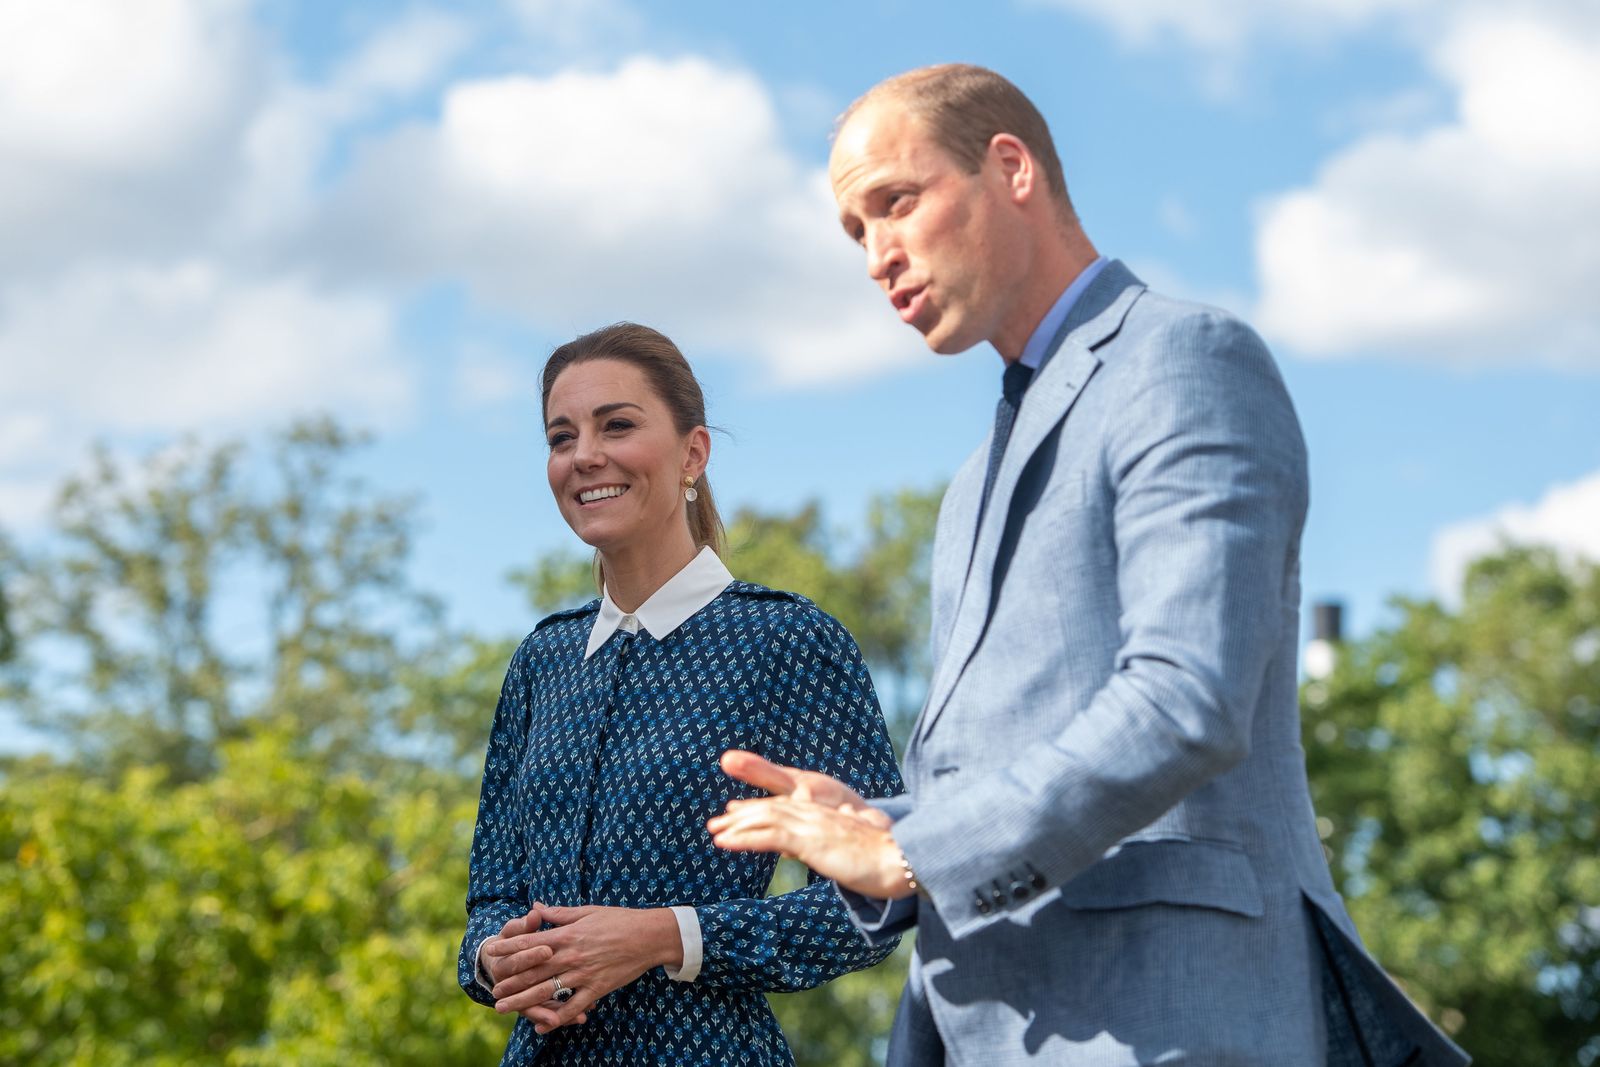 Duchess Kate and Prince William visit the Queen Elizabeth Hospital in King's Lynn on July 5, 2020, in Norfolk, England | Photo: Joe Giddens - WPA Pool/Getty Images